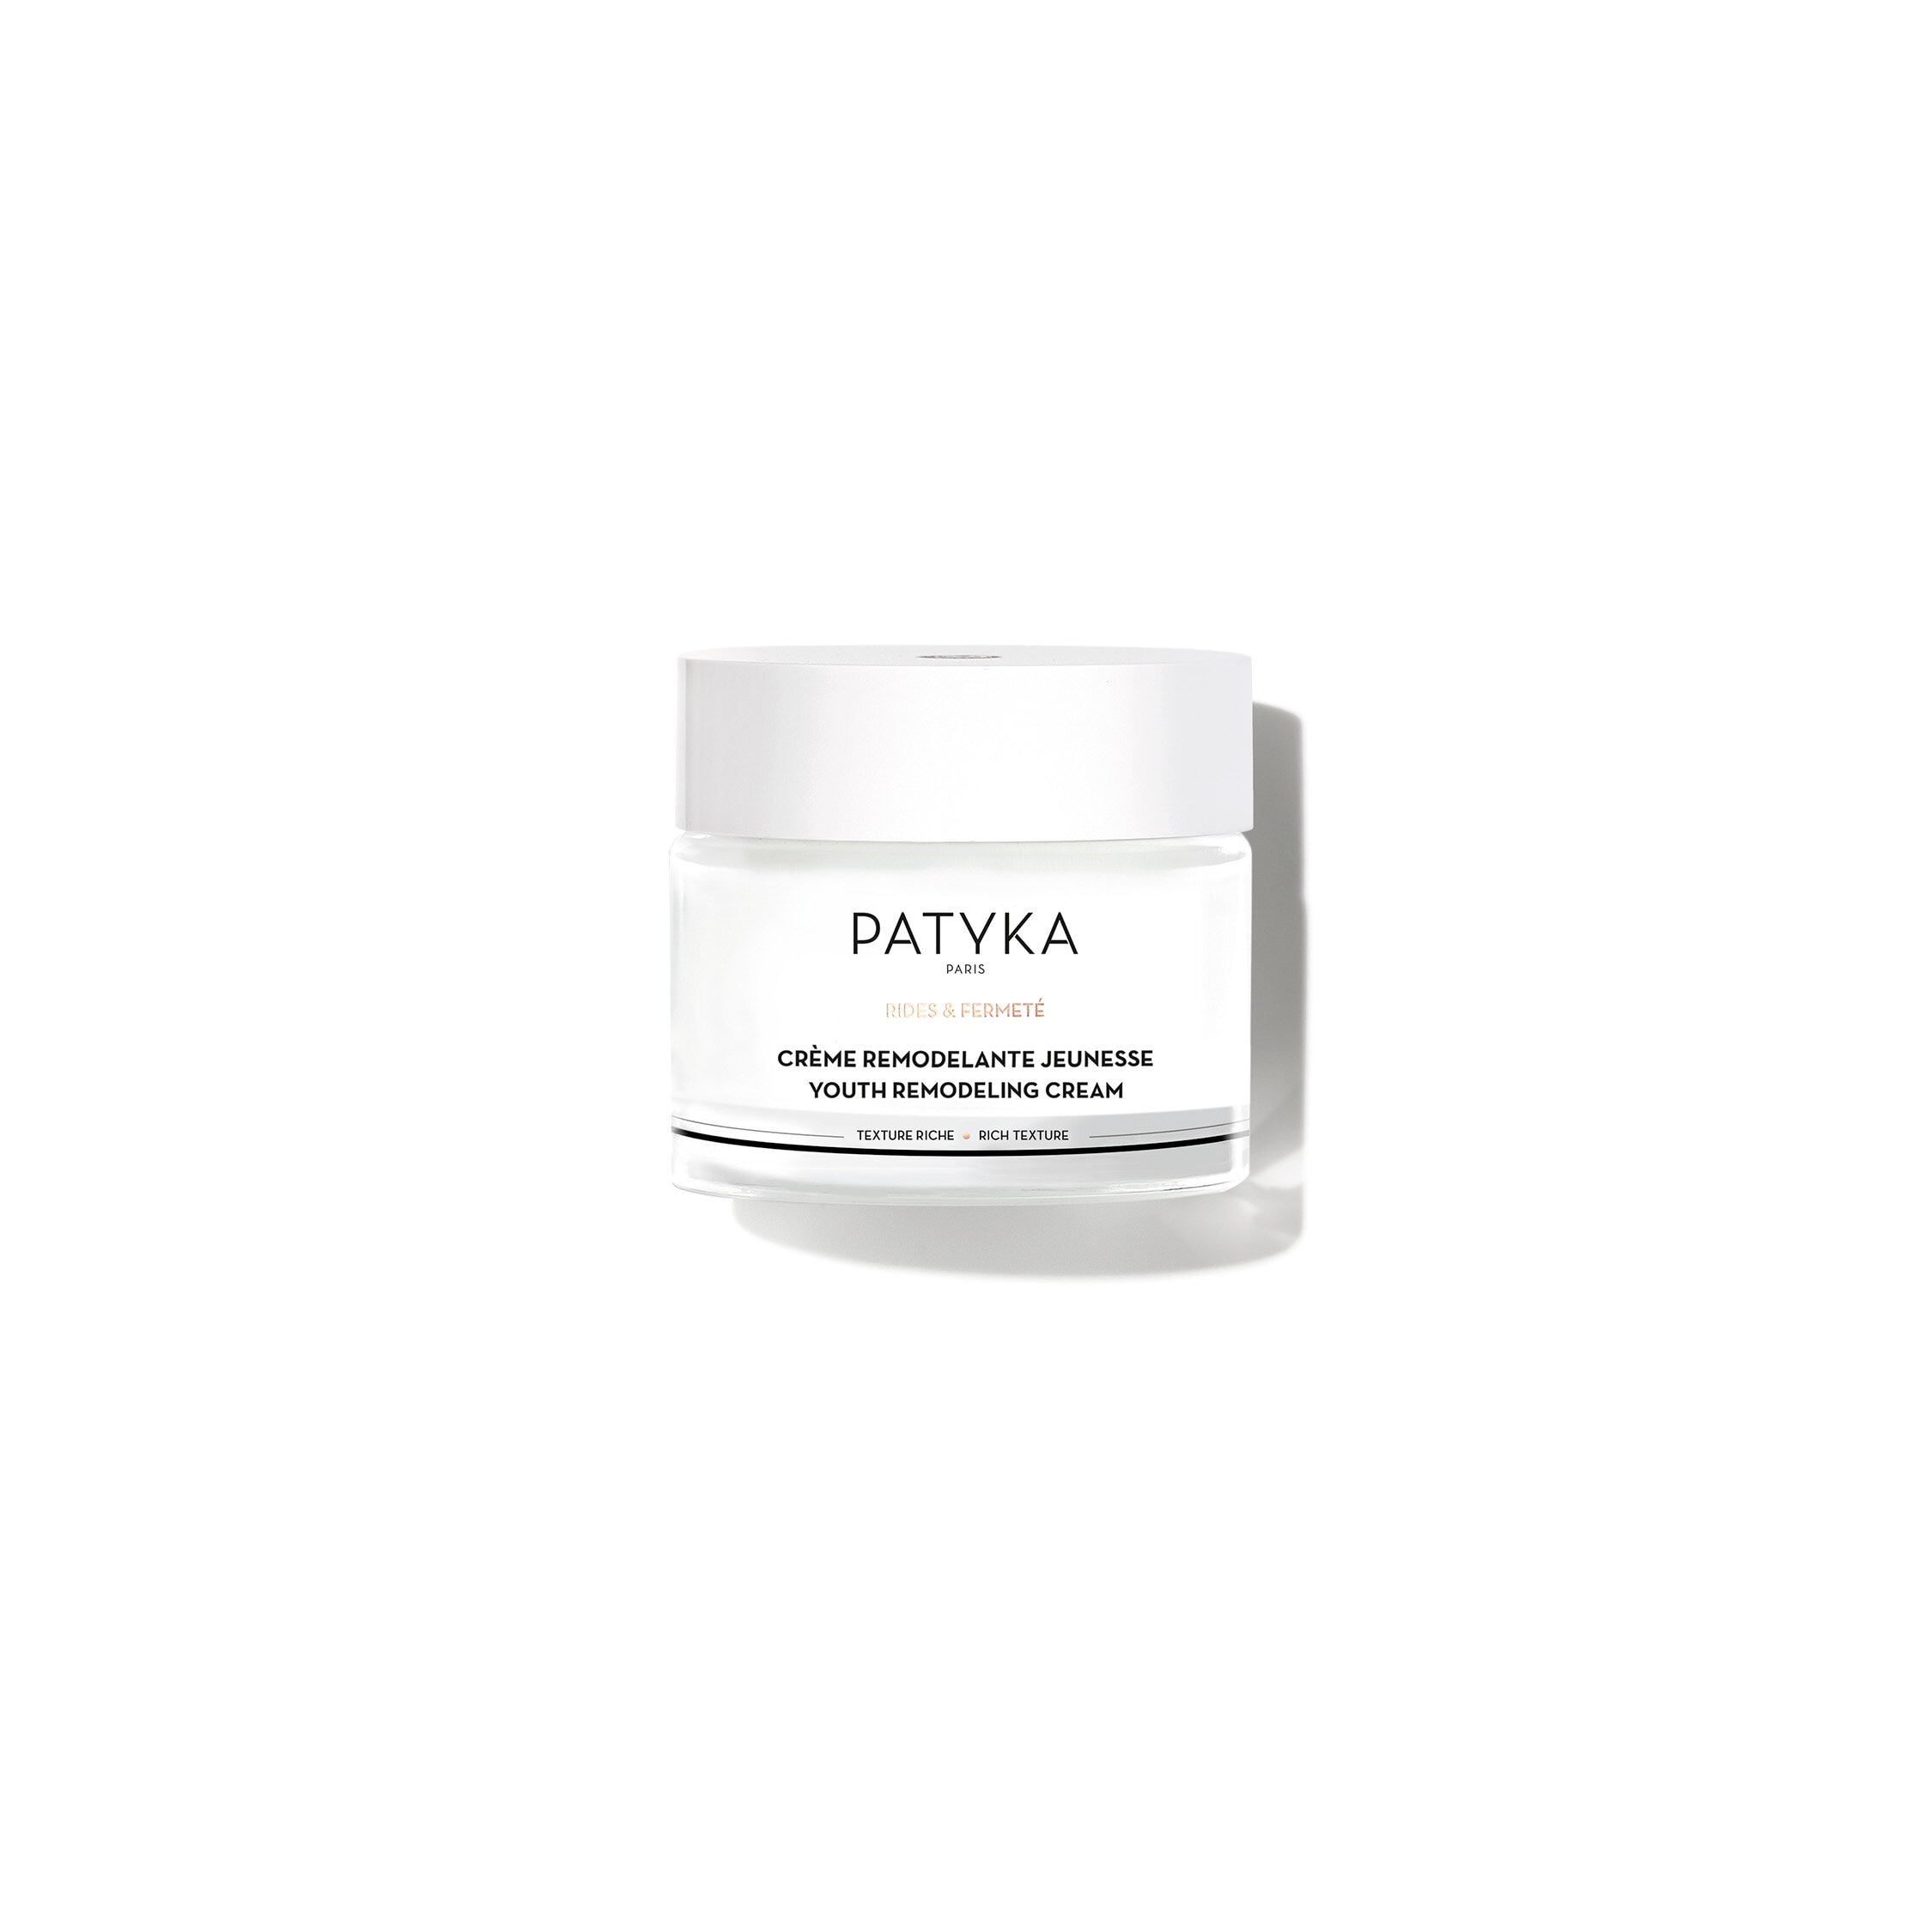 Patyka Youth Remodeling Cream, Rich Texture